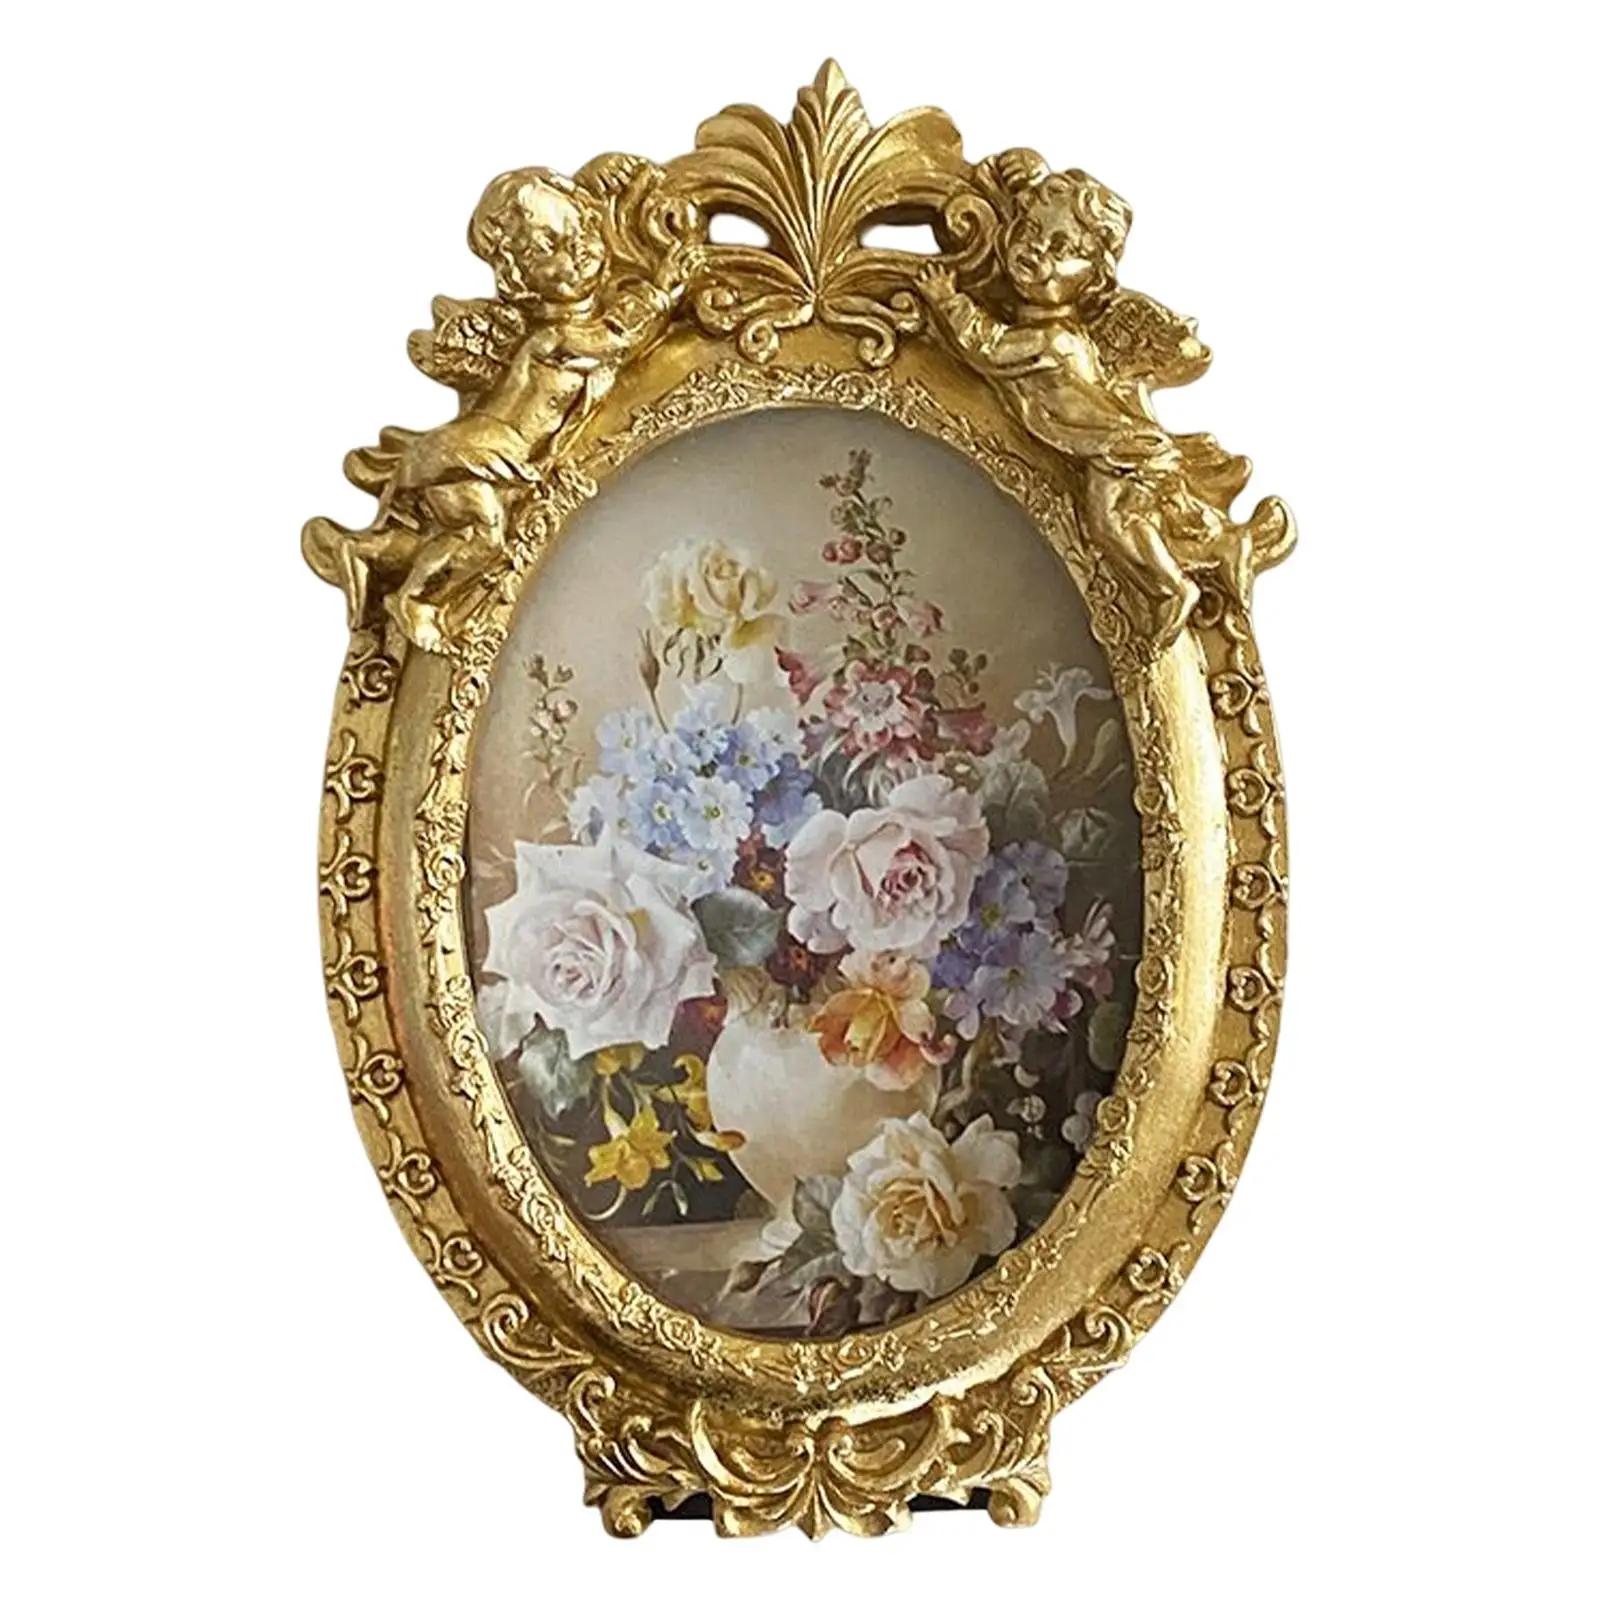 Retro Style Photo Frame Picture Holder Decor Tabletop Hanging Ornate Resin Picture Frame for Living Room Bedroom Kitchen